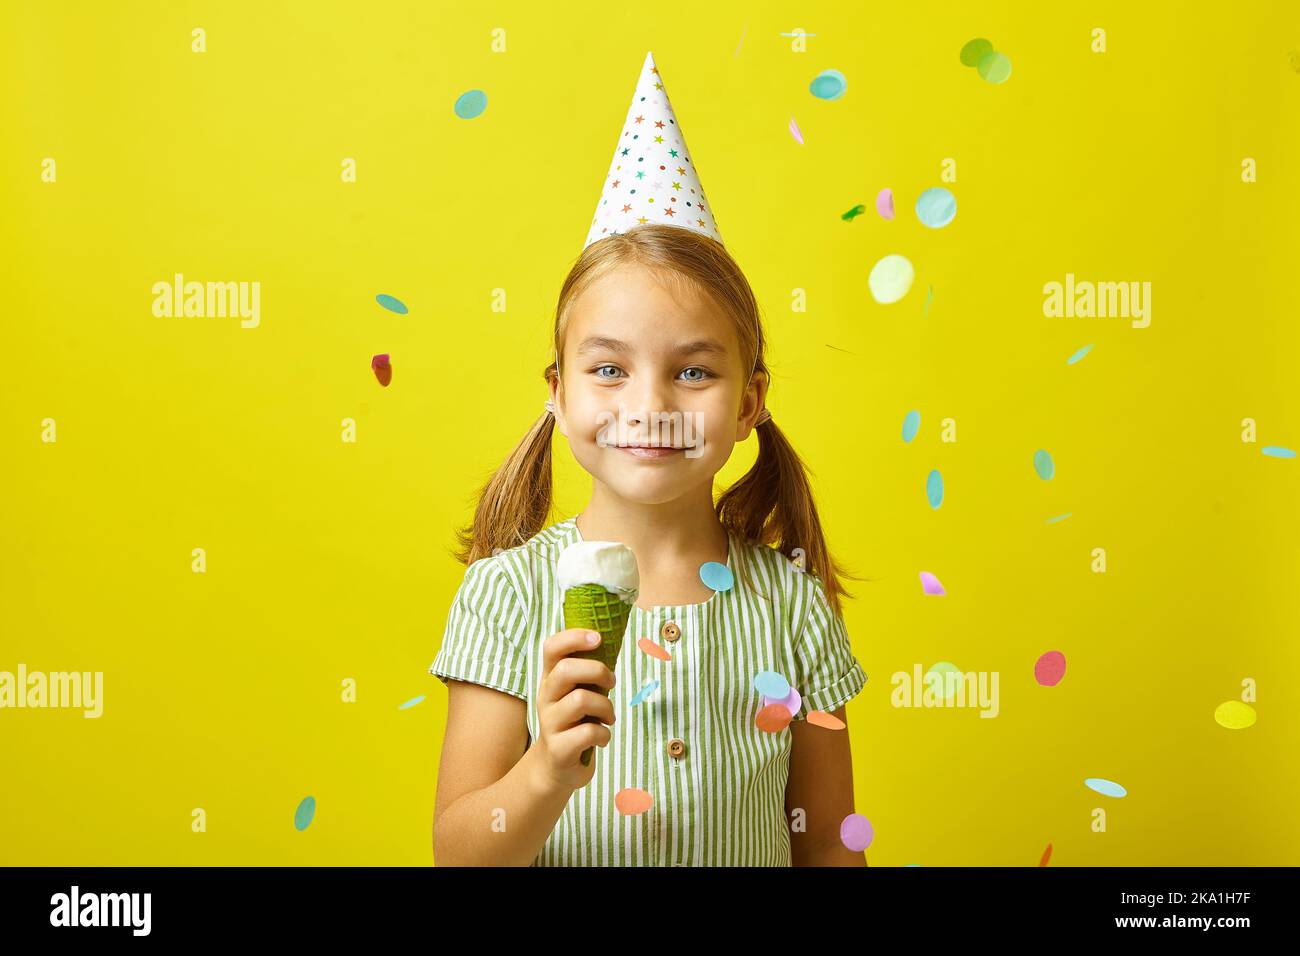 Happy little girl in a birthday hat, eating ice cream, it pours confetti, portrait on yellow isolated. Stock Photo